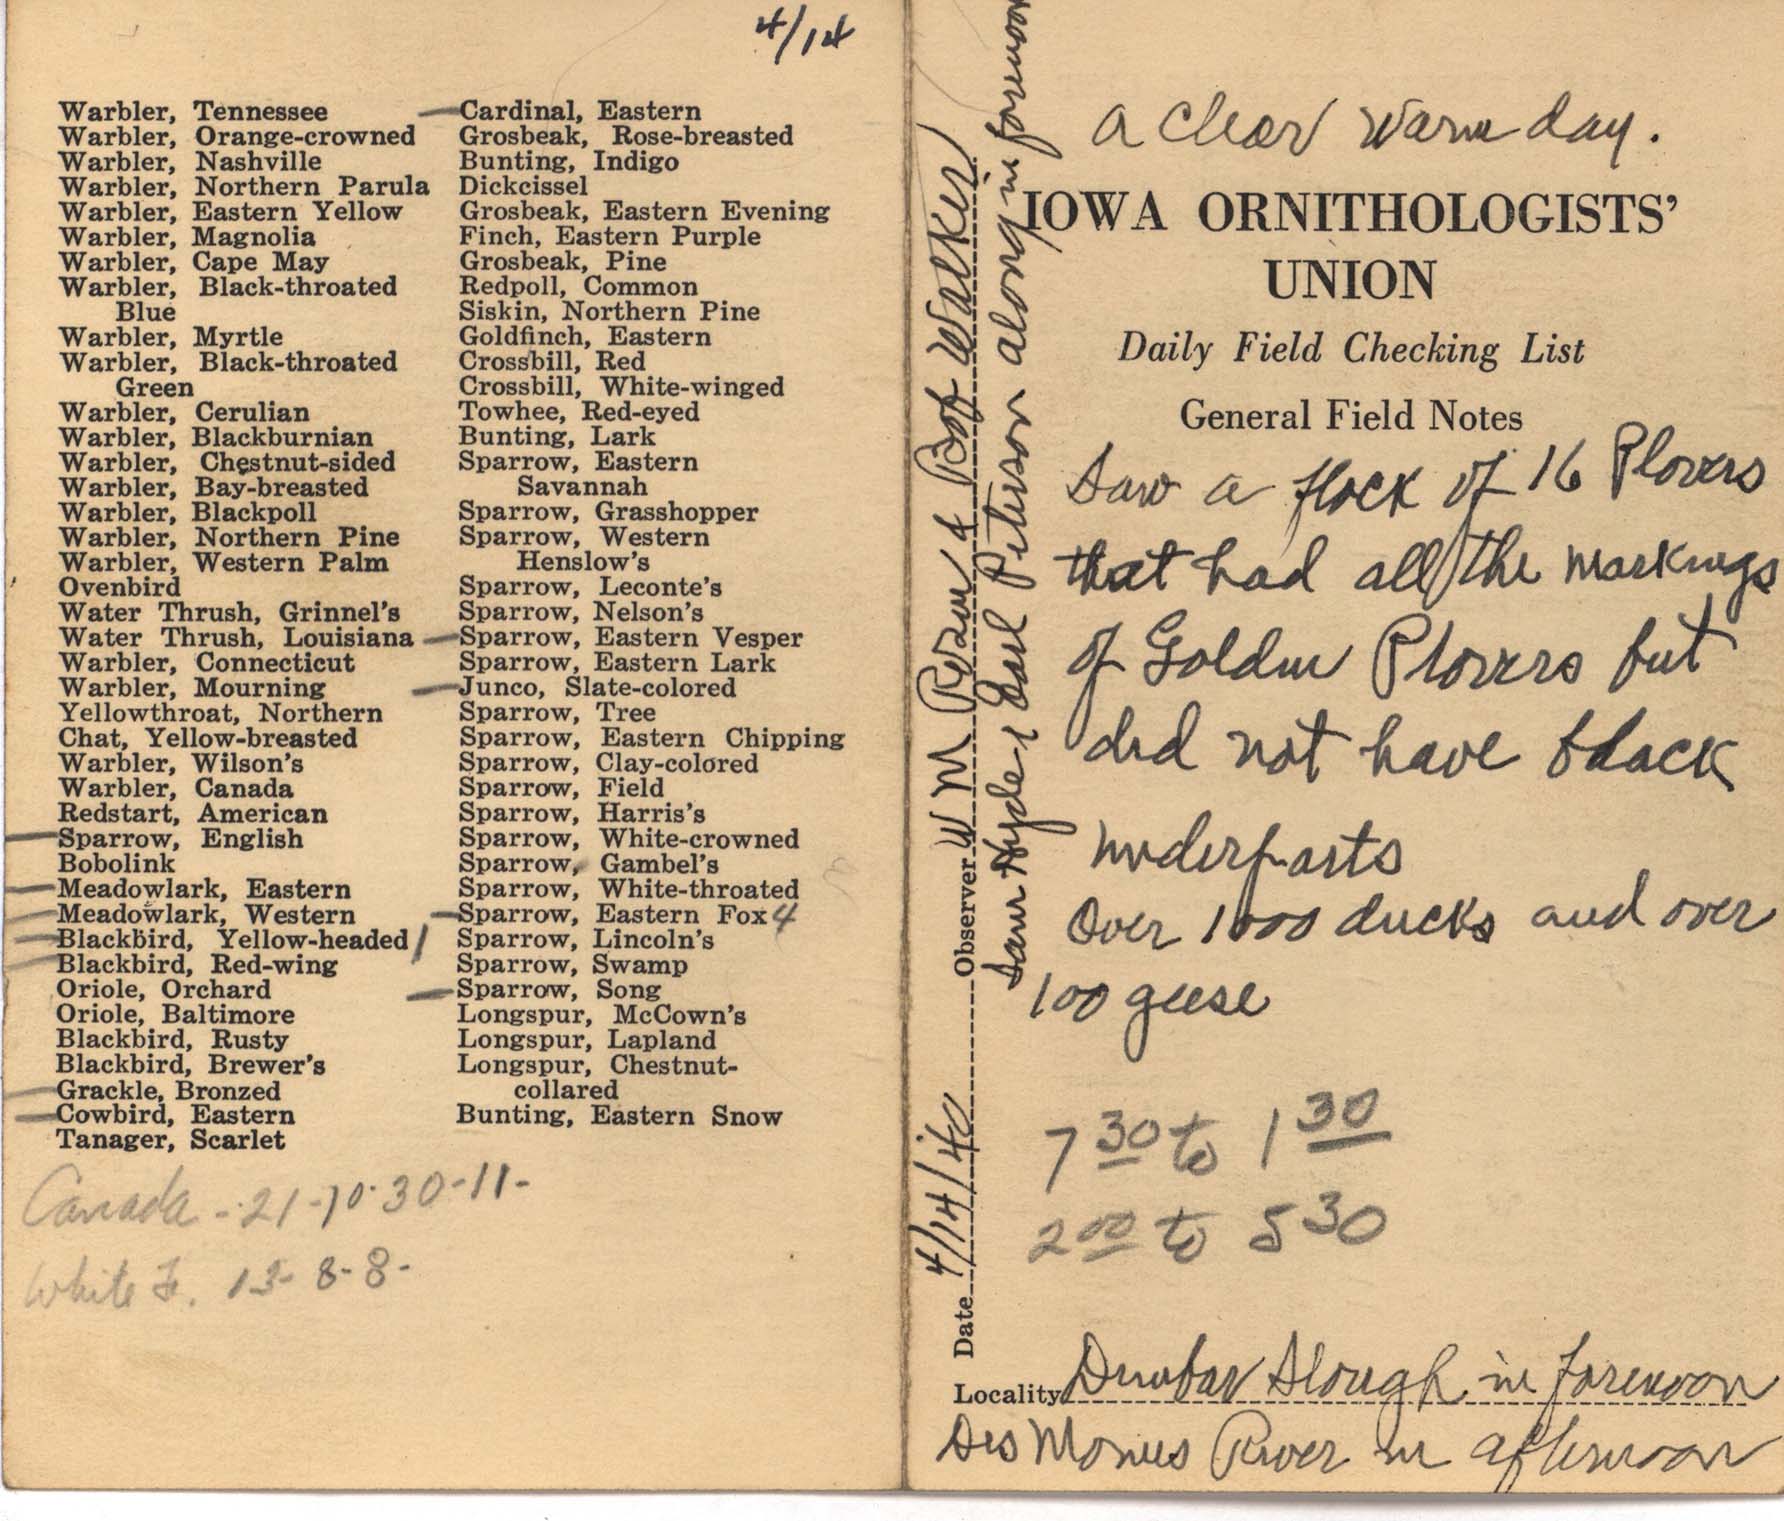 Daily field checking list by Walter Rosene, April 14, 1940